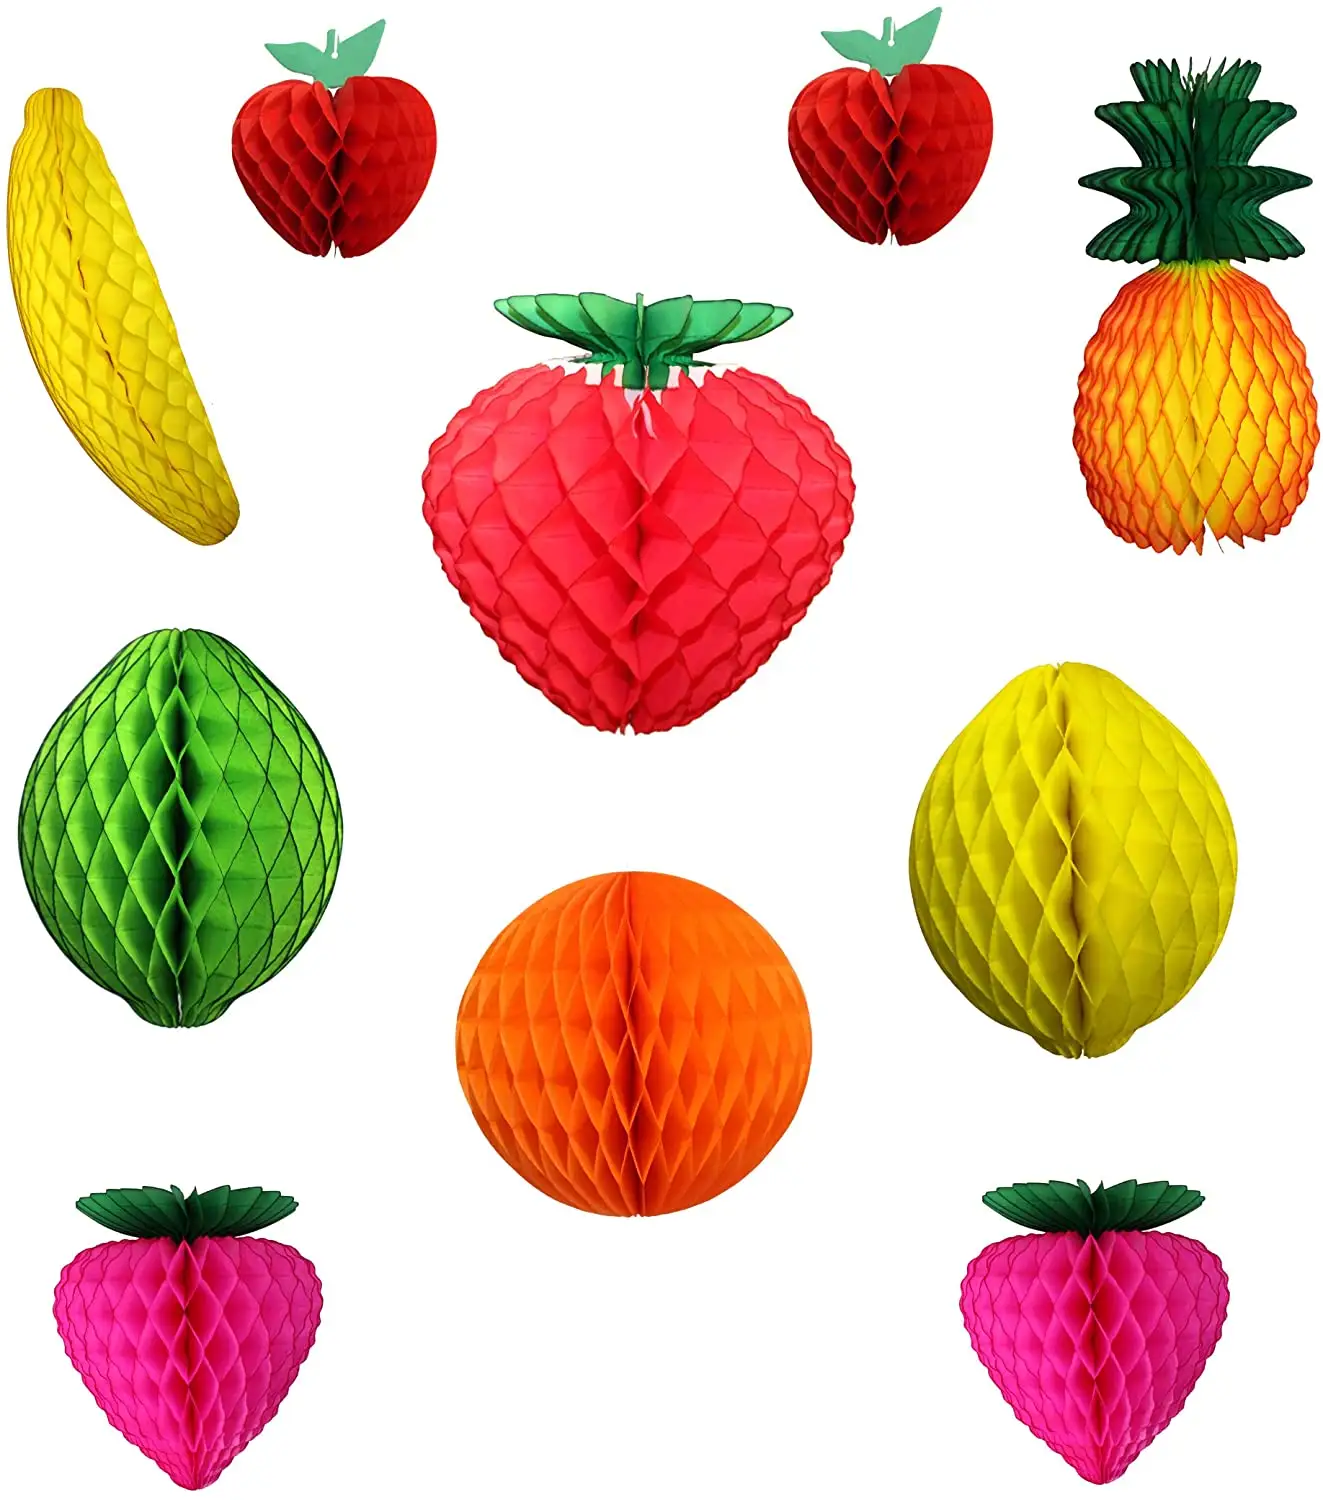 Colorful Party Decorations Tissue Pineapples Fruit Honeycomb Balls For Sale Paper Decoration Paper Honeycomb Ball